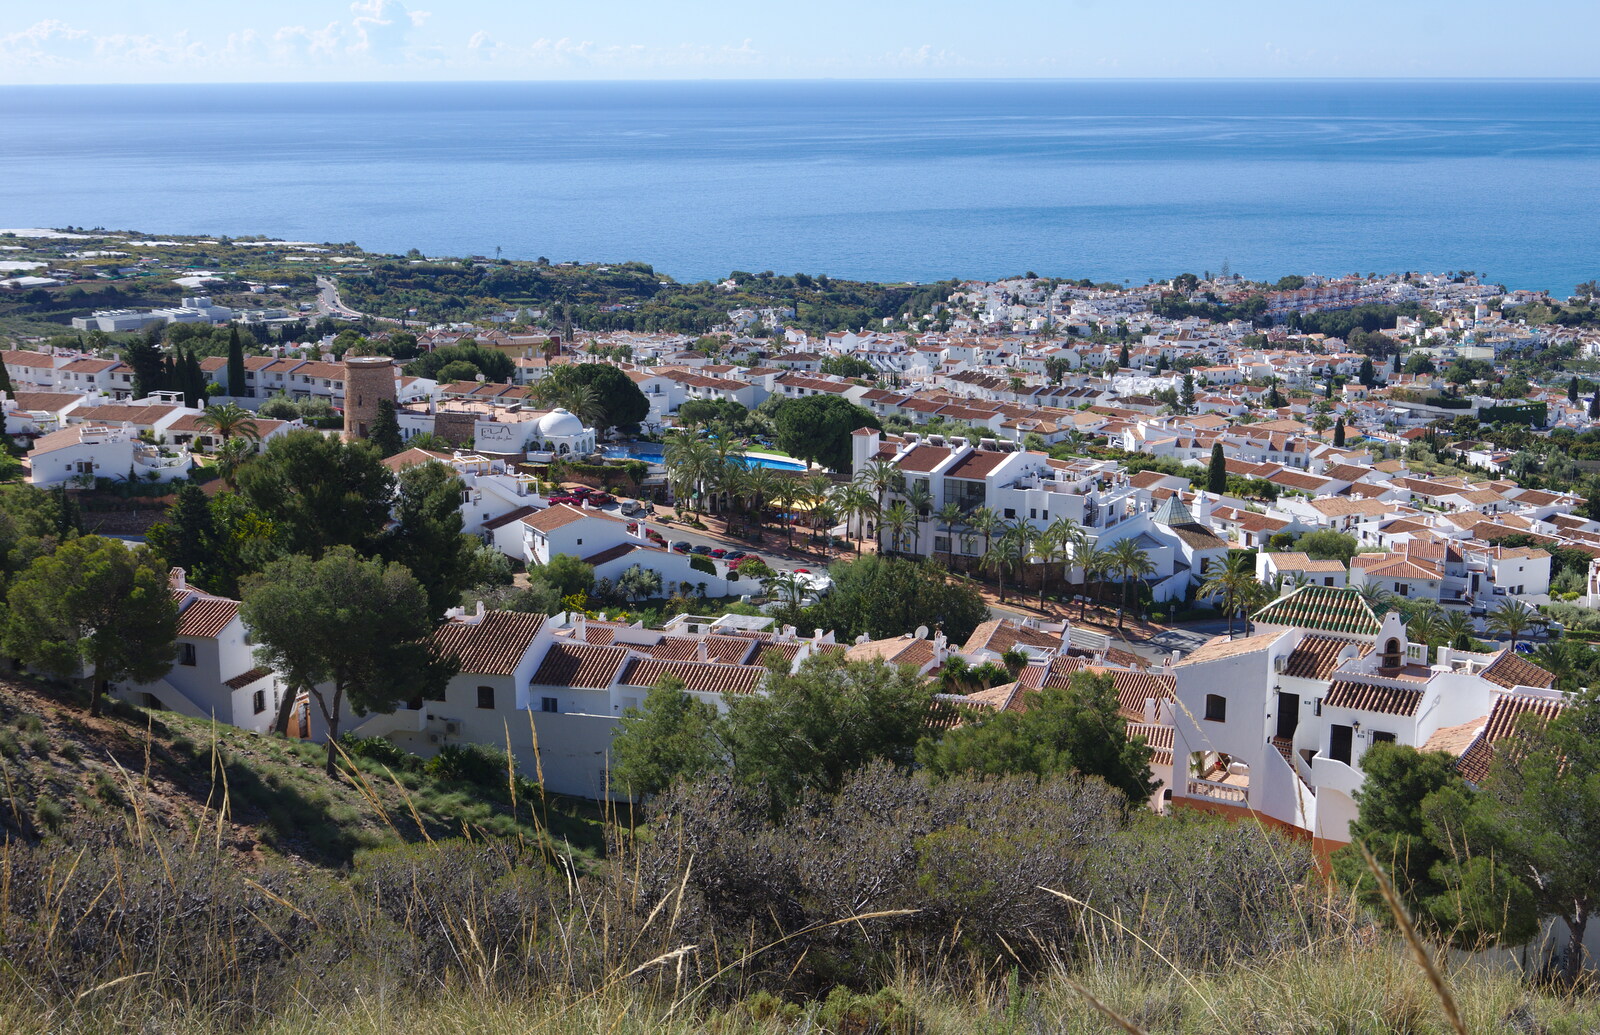 The Capistrano village, and the sea from A Walk up a Hill, Paella on the Beach and Granada, Andalusia, Spain - 19th April 2018